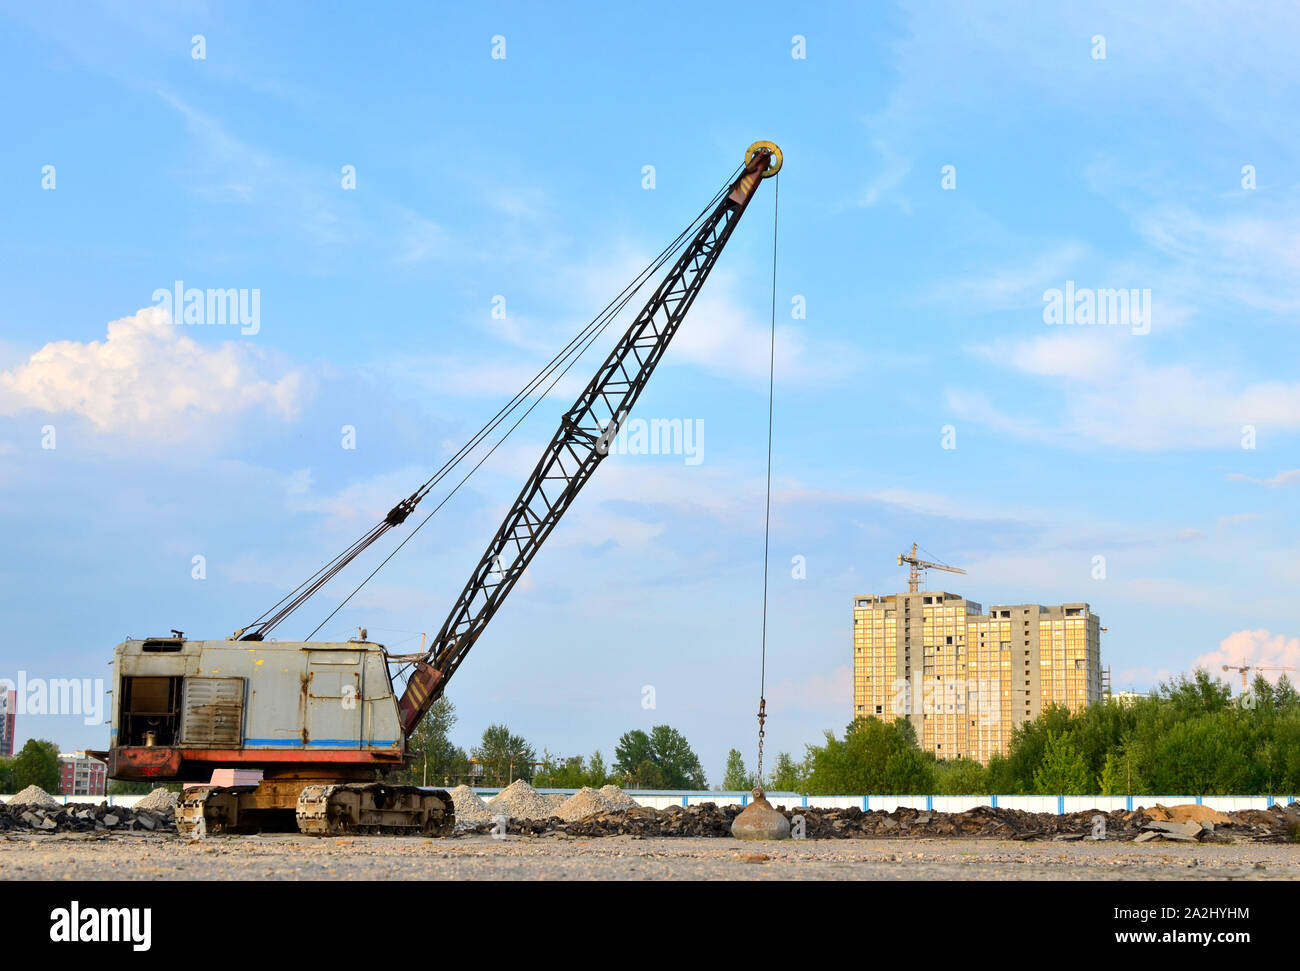 Large crawler crane or dragline excavator with a heavy metal wrecking ball on a steel cable. Wrecking balls at construction sites. Dismantling and dem Stock Photo